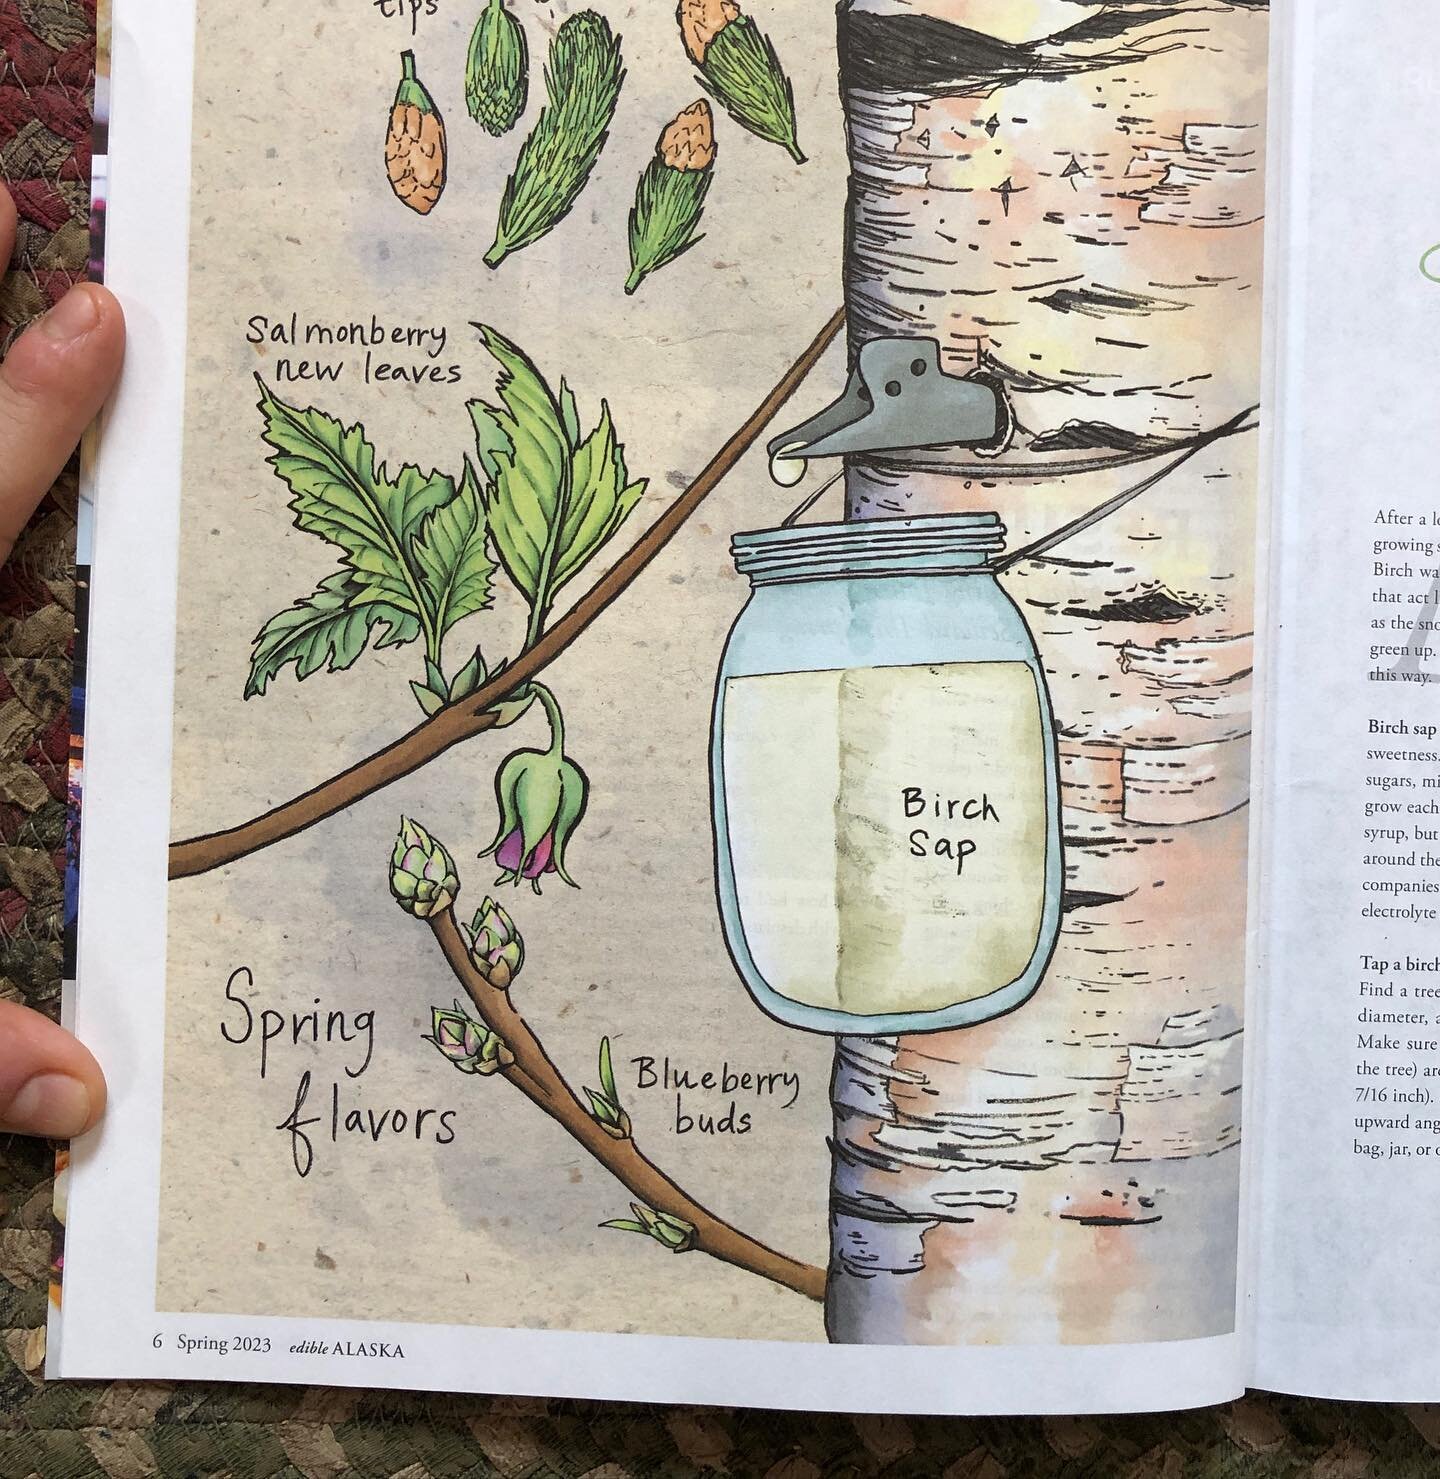 Happy equinox (or day after!) it&rsquo;s feeling more like spring though not quite ready to start harvesting sap. To celebrate the season check out the latest issue of @ediblealaska break up and green up!
#ediblecommunities #drinkyourtrees #edibleill